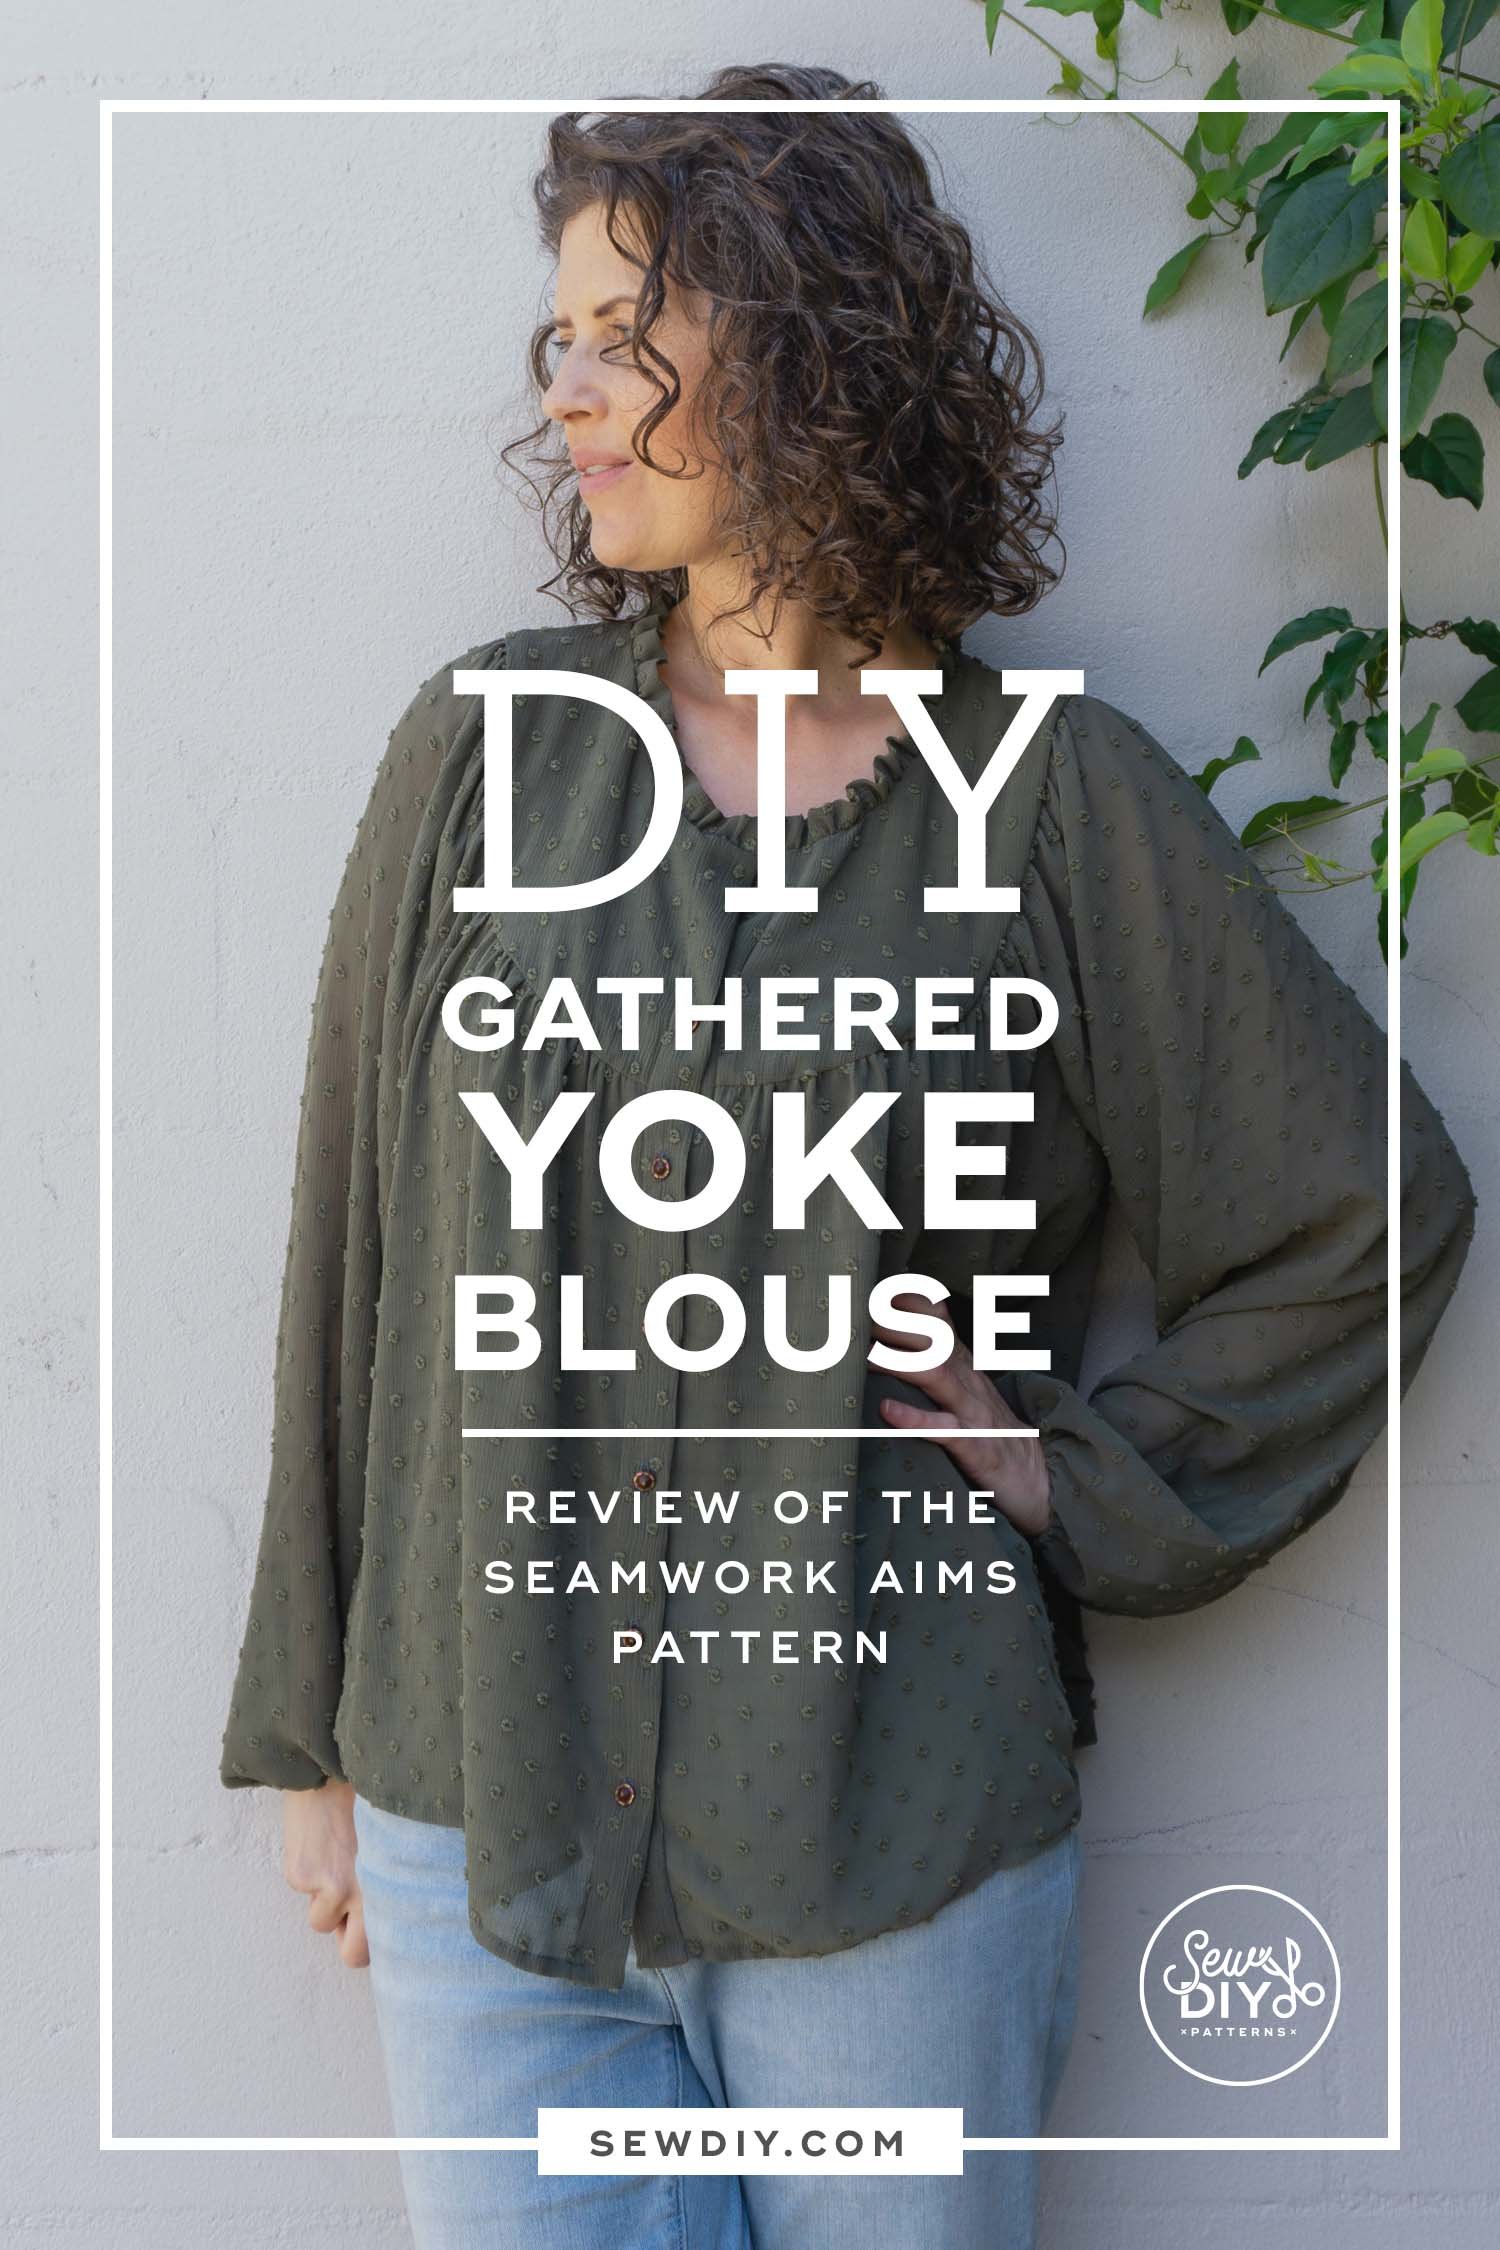 DIY Gathered Yoke Blouse — A review of the Aims pattern by